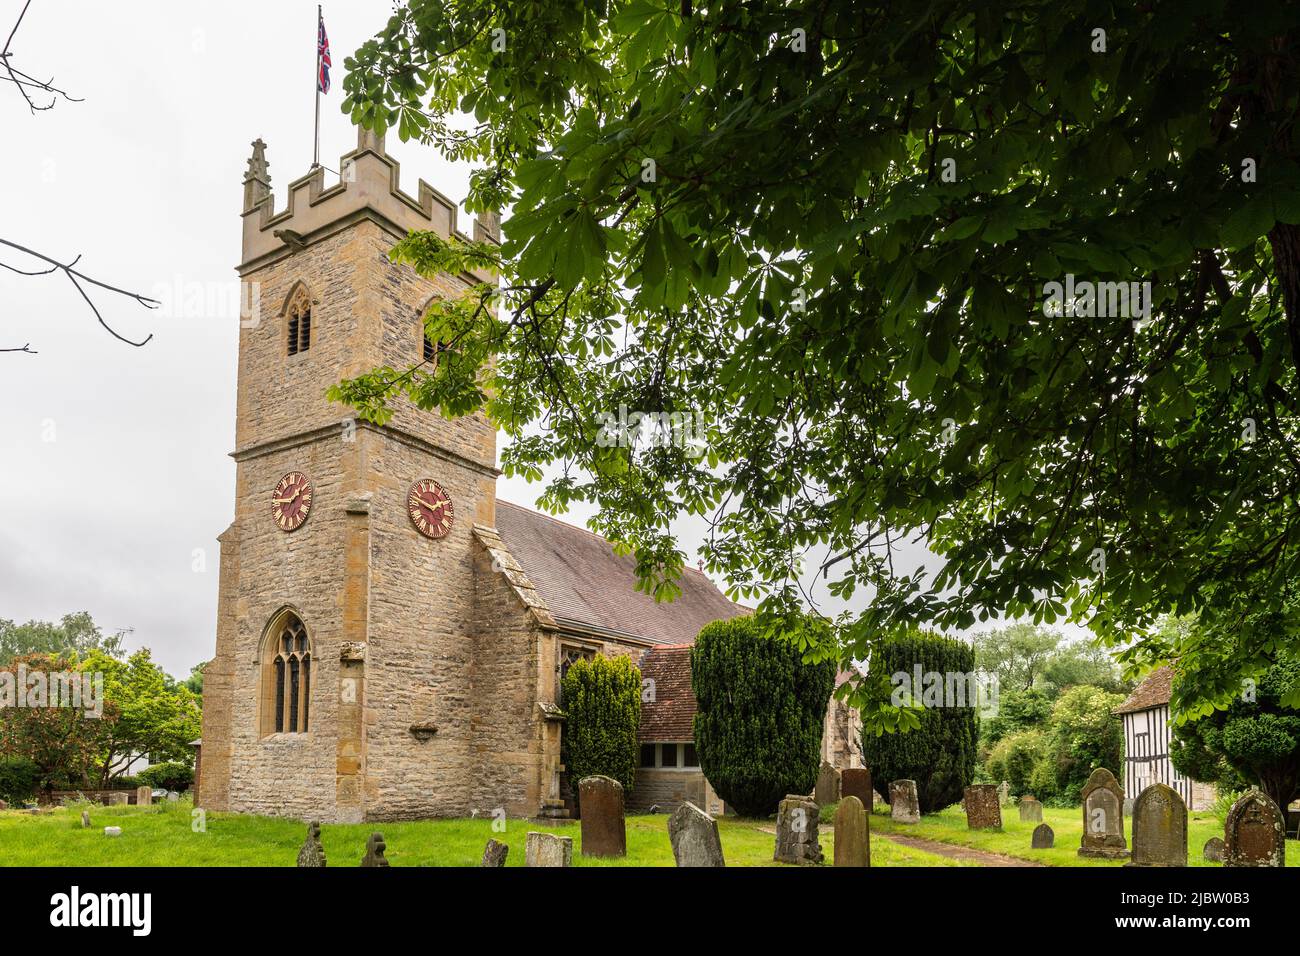 St. Helen's Church in the picturesque village of Clifford Chambers, Warwickshire, UK. Stock Photo